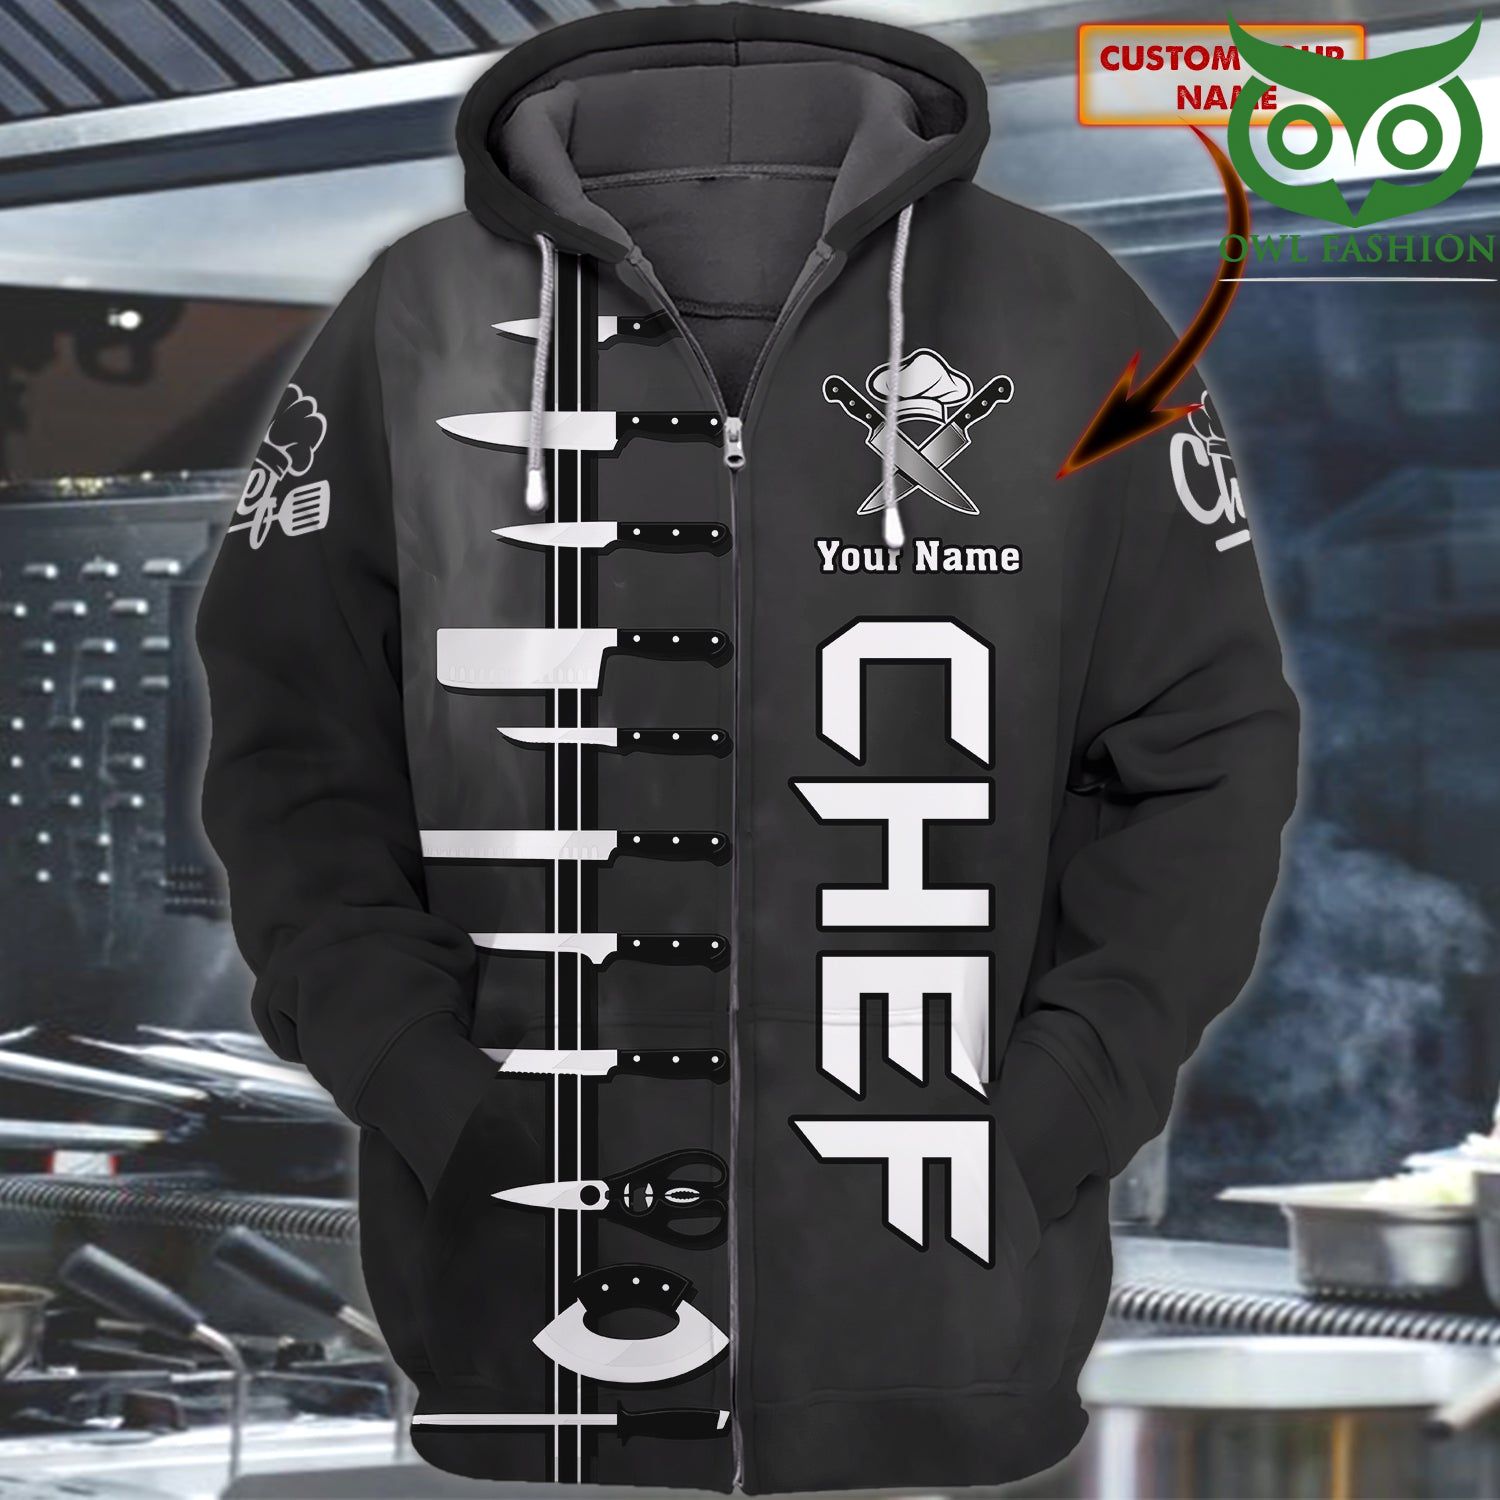 53 CHEF Personalized Name with knives grey 3D Zipper Hoodie